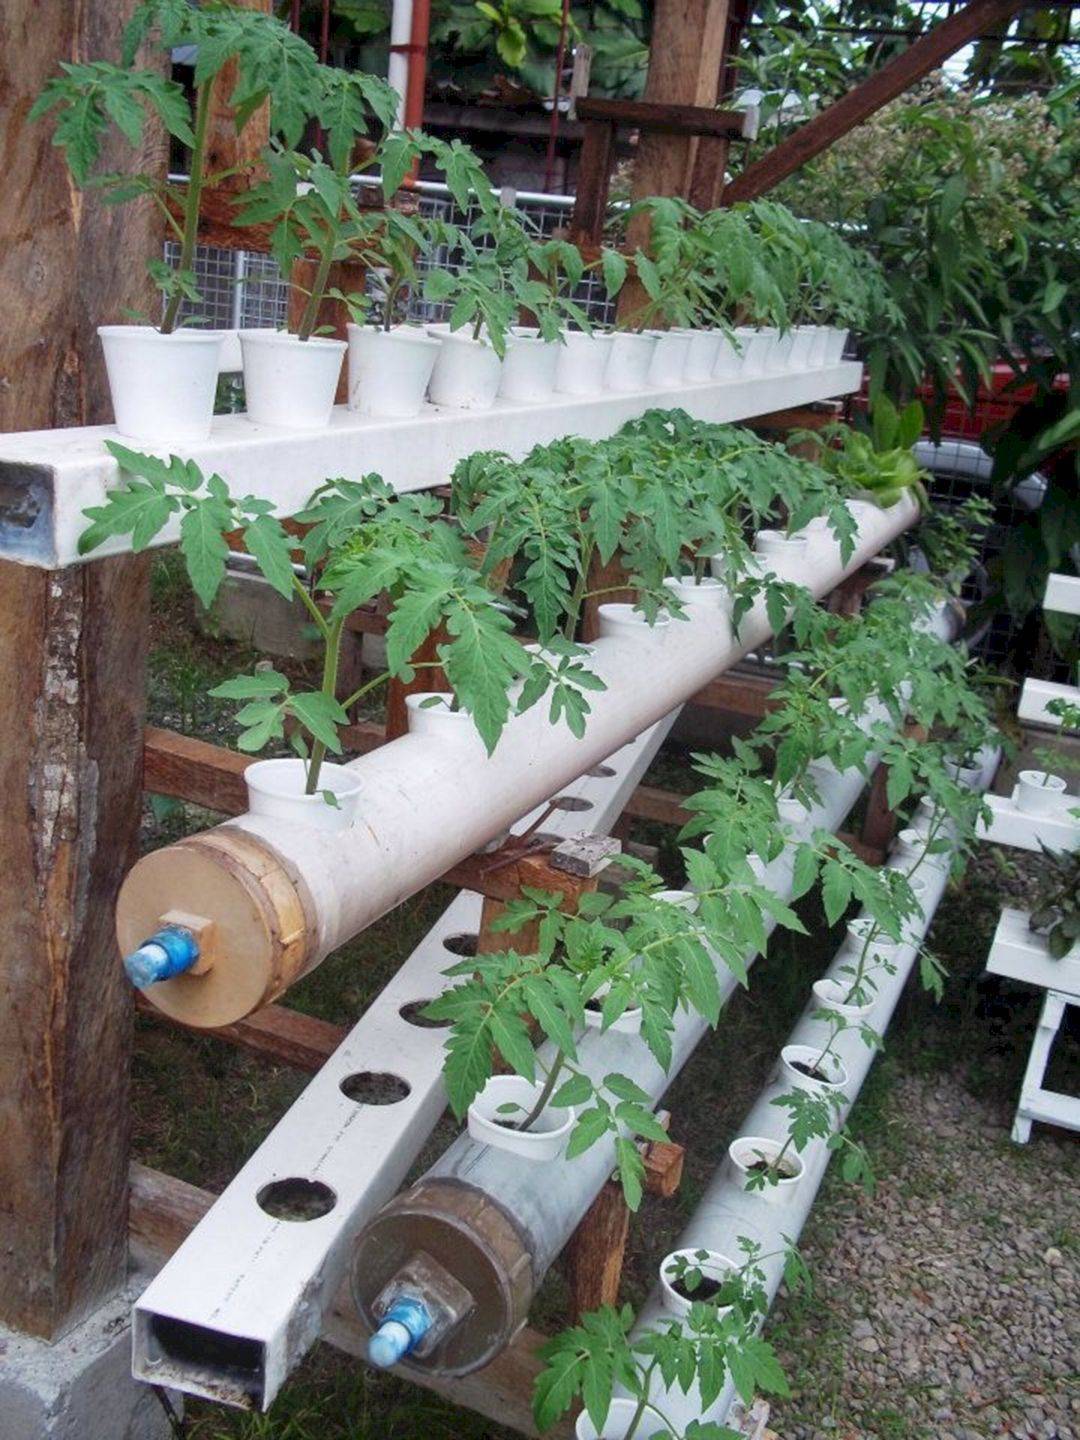 A Hydroponic Indoor Gardening Kit